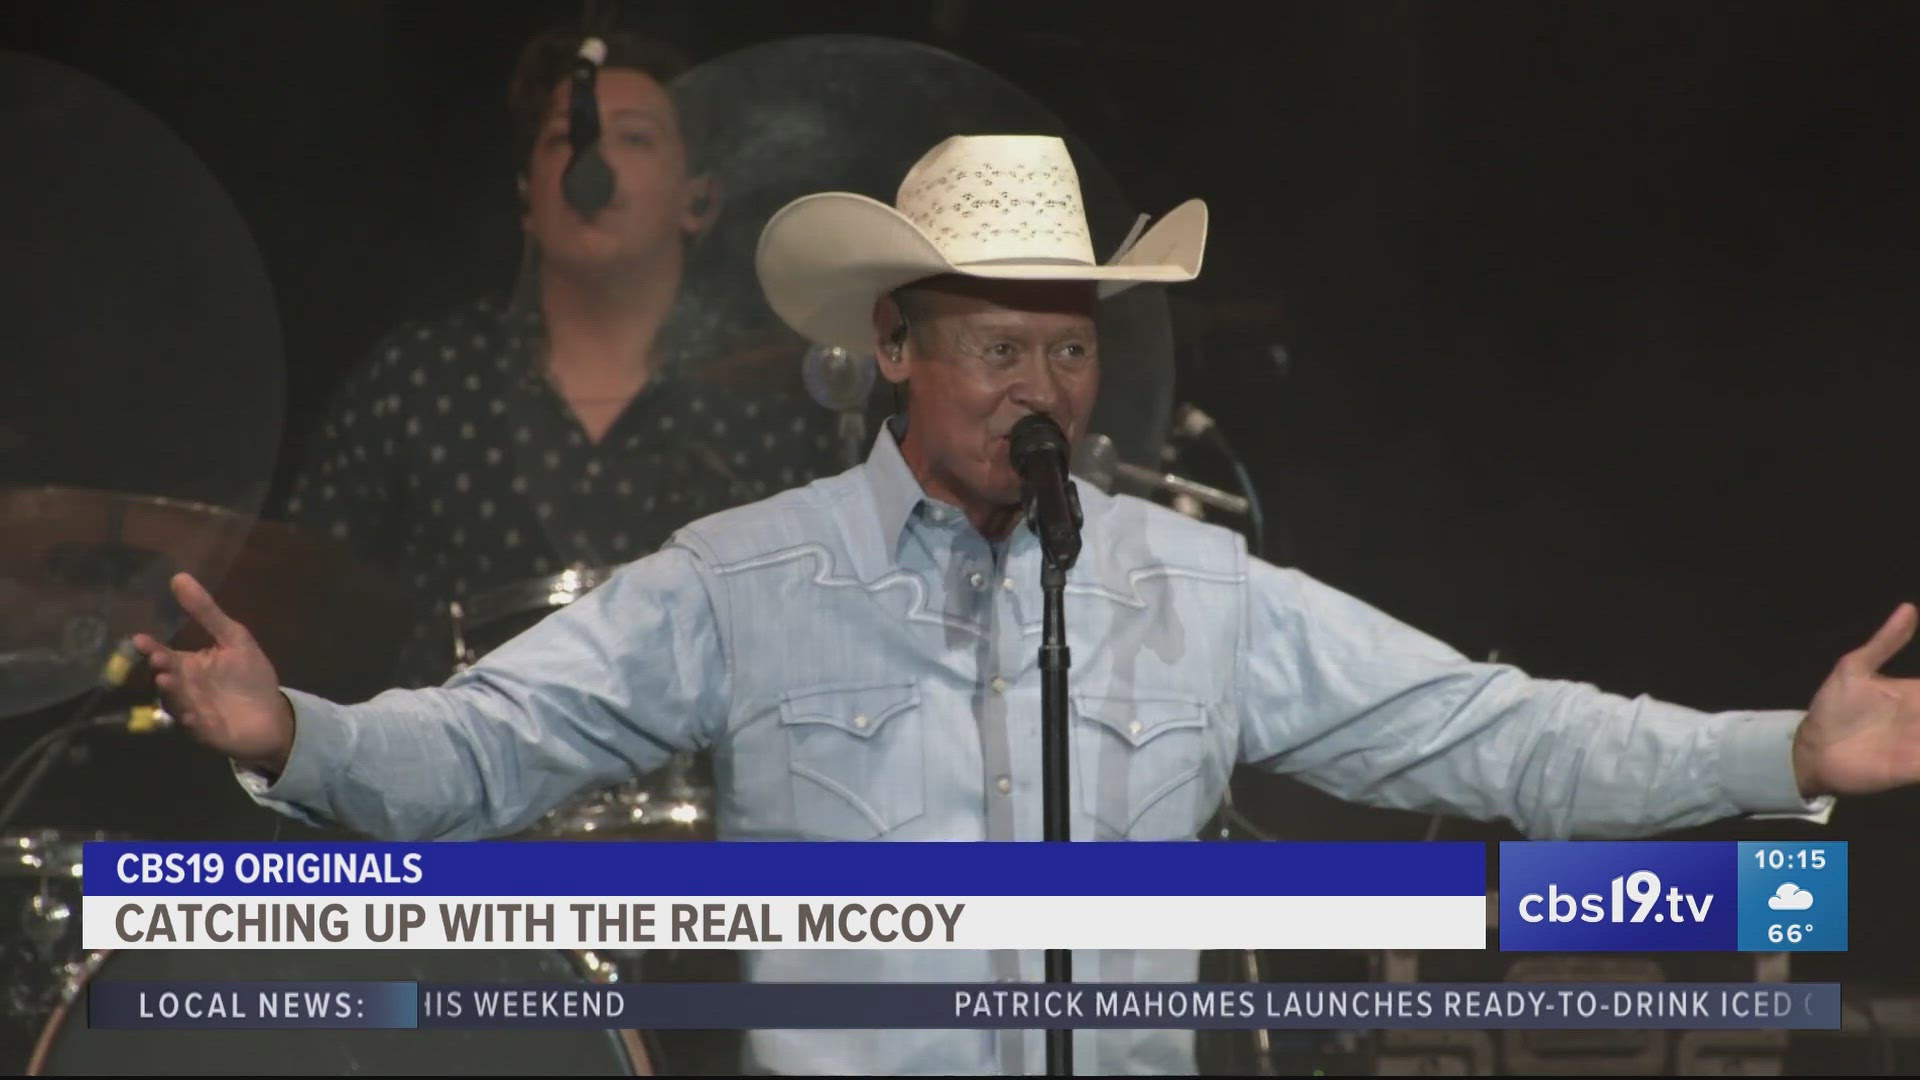 Neal McCoy has been entertaining audiences around the world for more than 30 years.